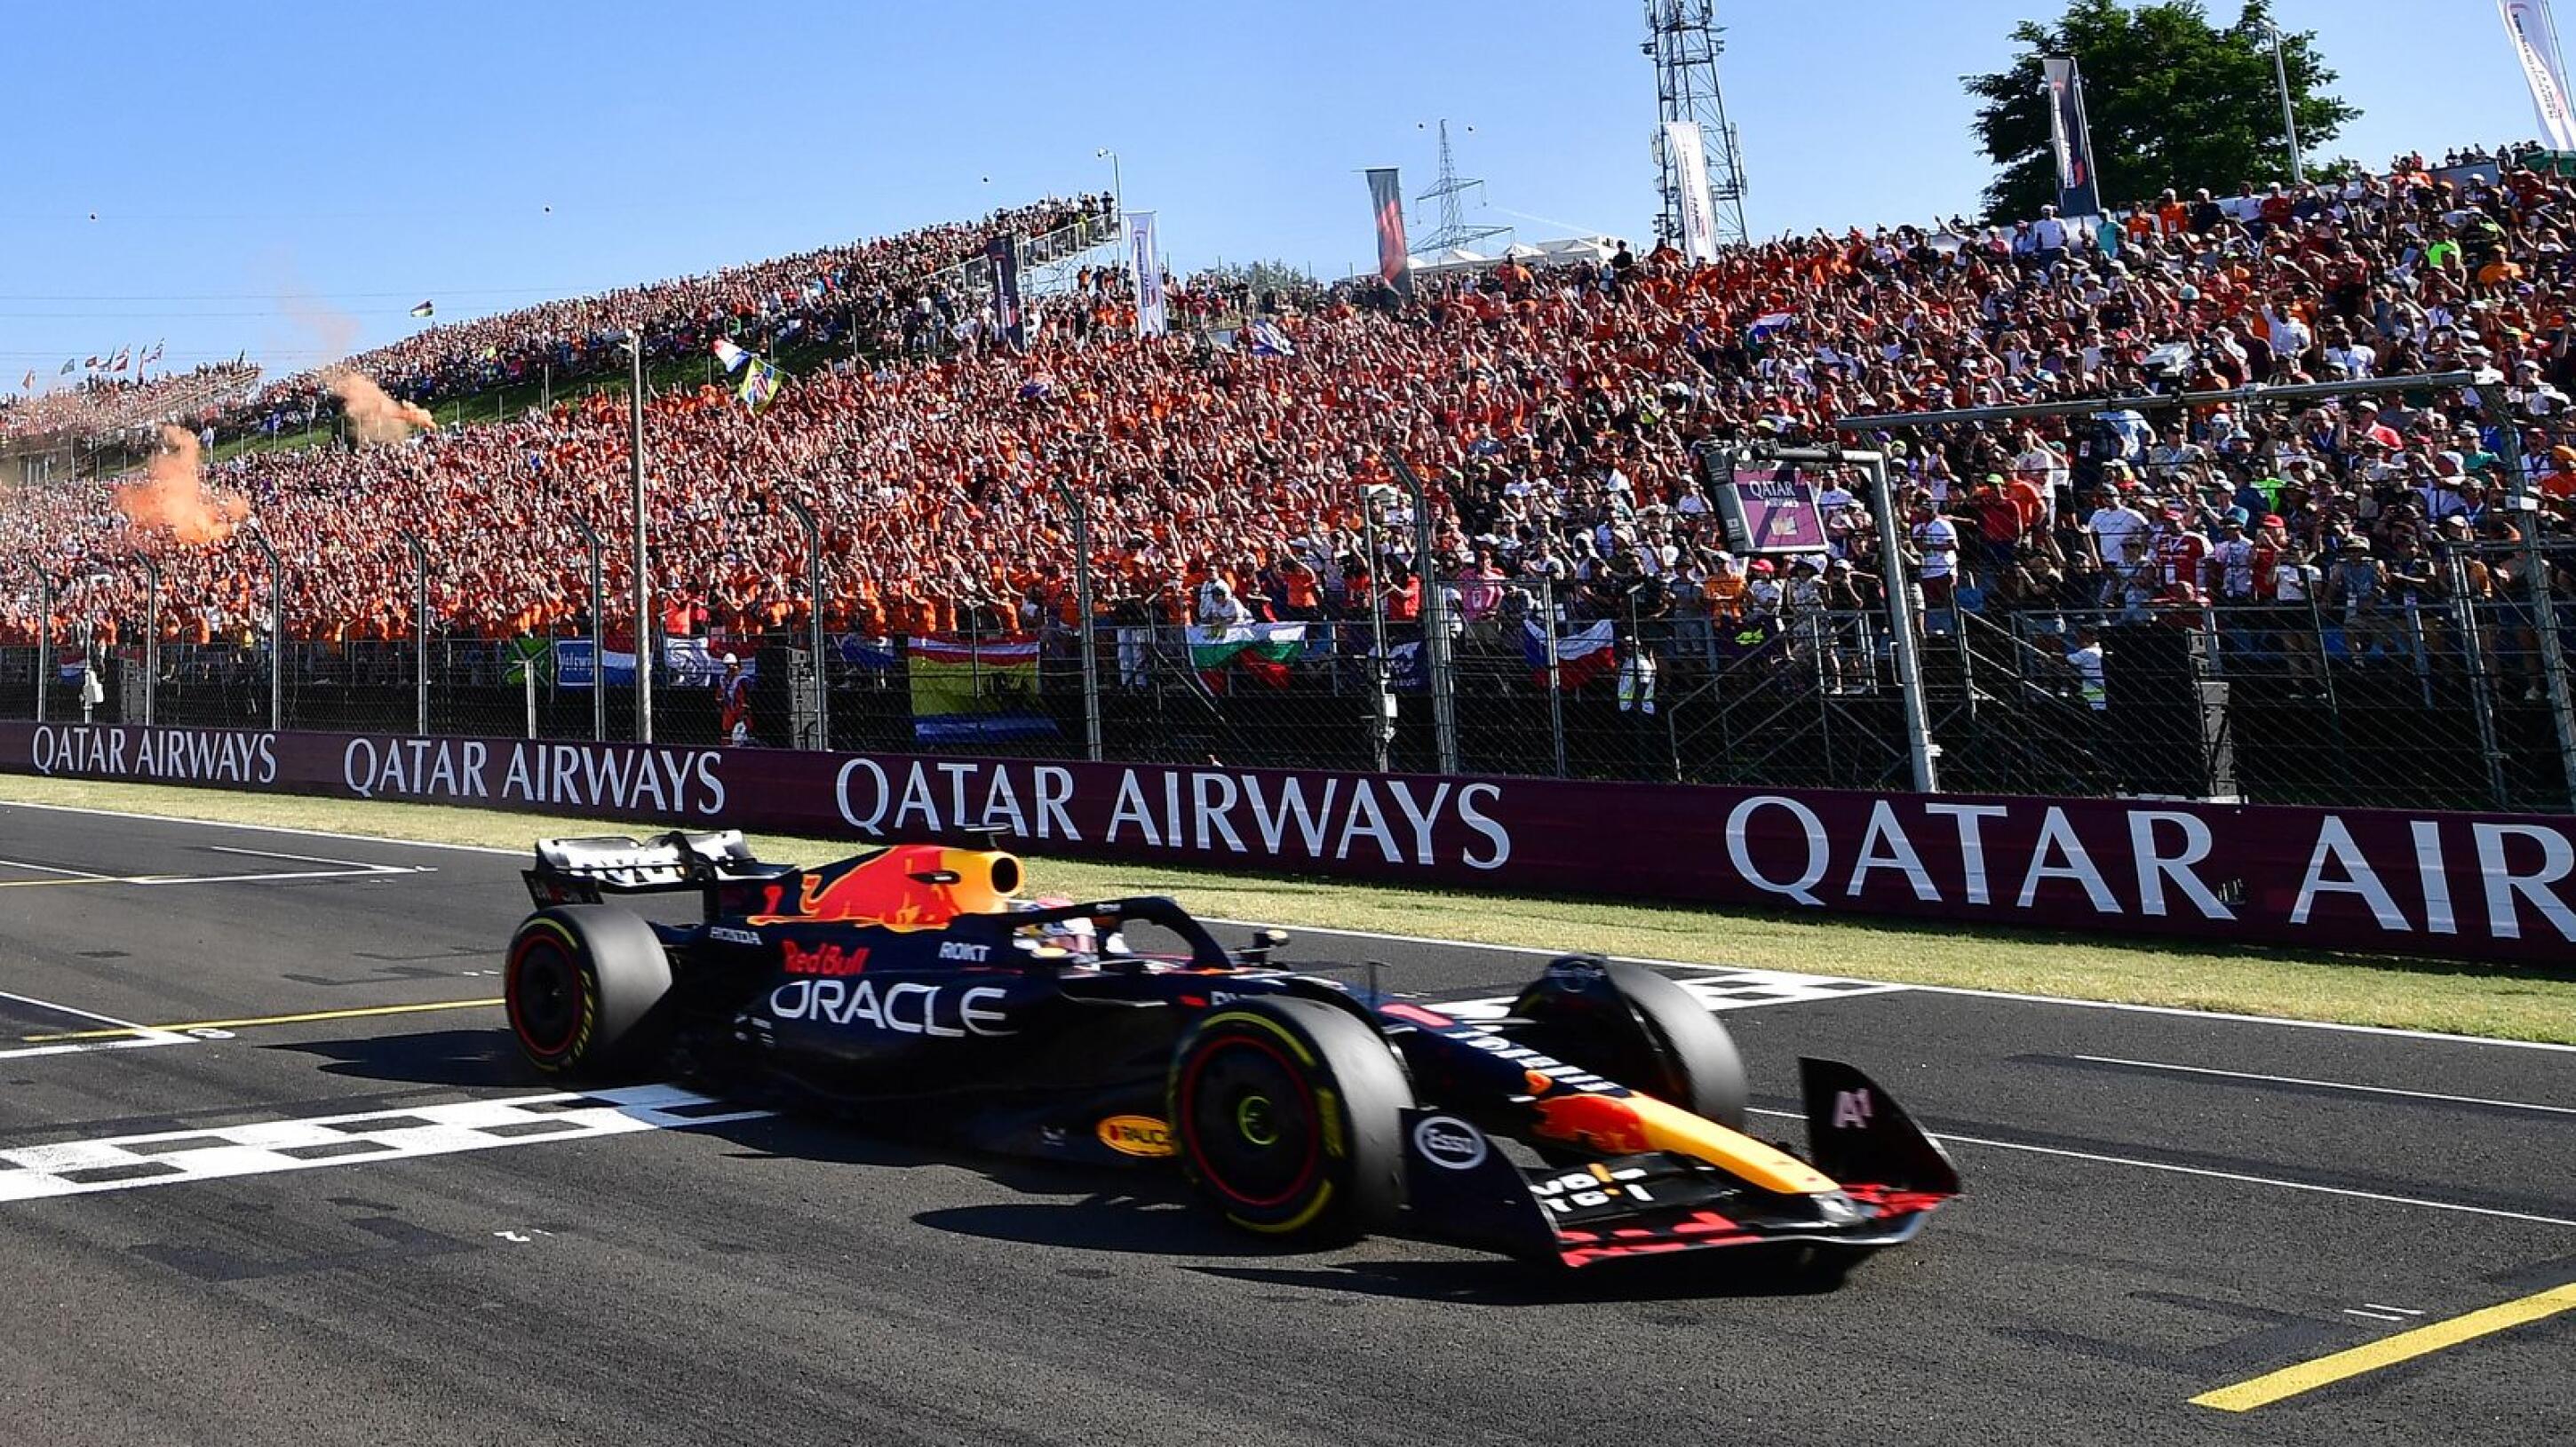 Red Bull Racing's Dutch driver Max Verstappen crosses the finish line to win the Formula One Hungarian Grand Prix at the Hungaroring race track in Mogyorod near Budapest